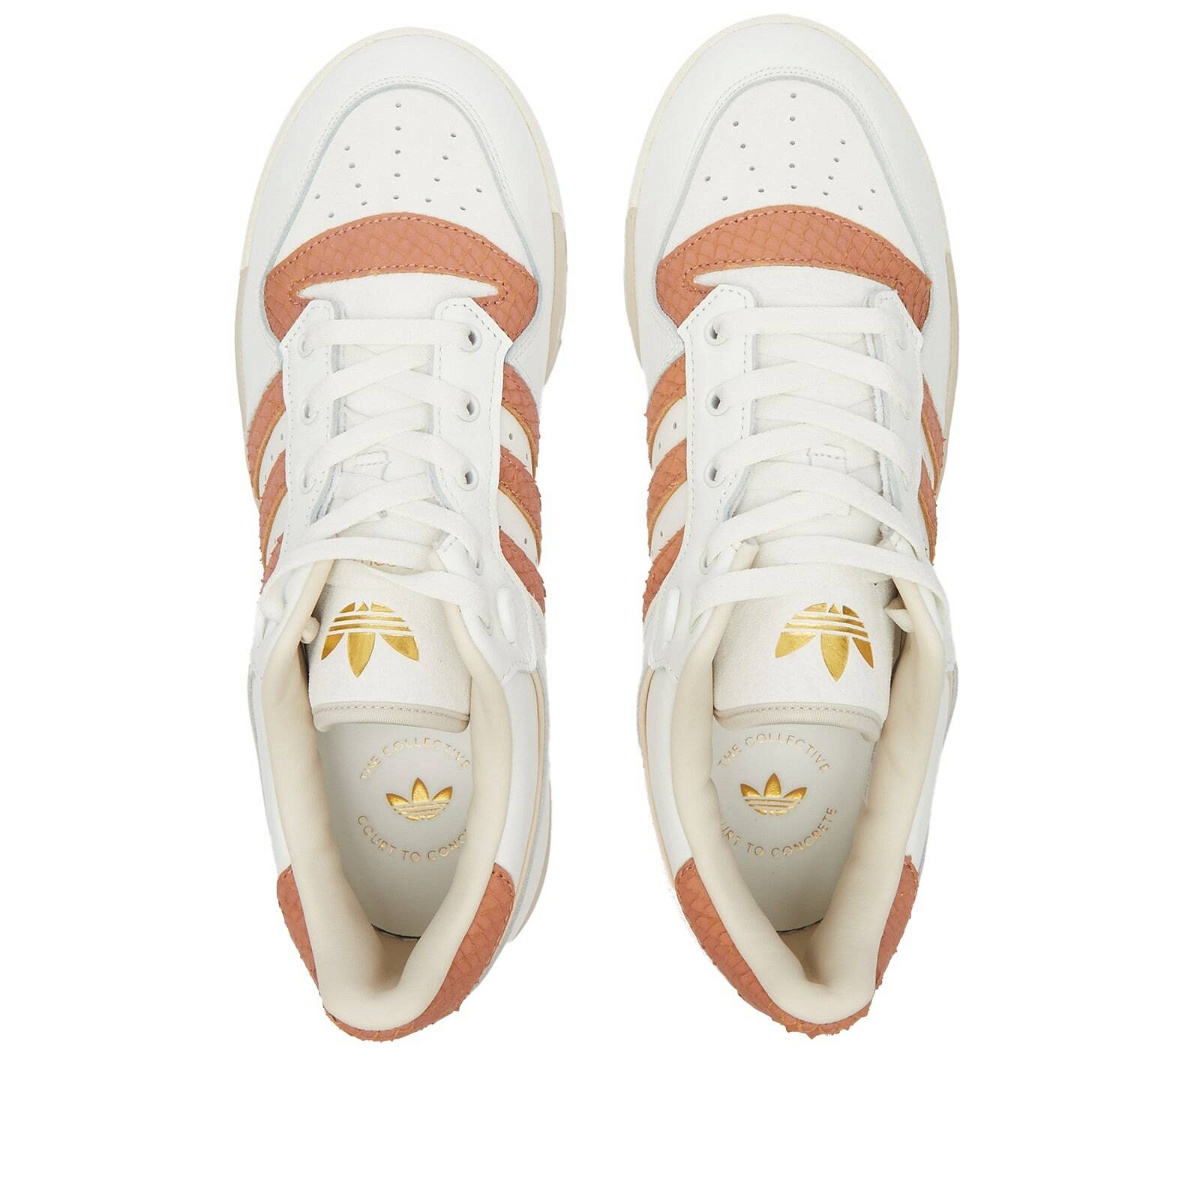 Adidas Rivalry Low in Sneakers adidas 86 White/Clay Strata Core